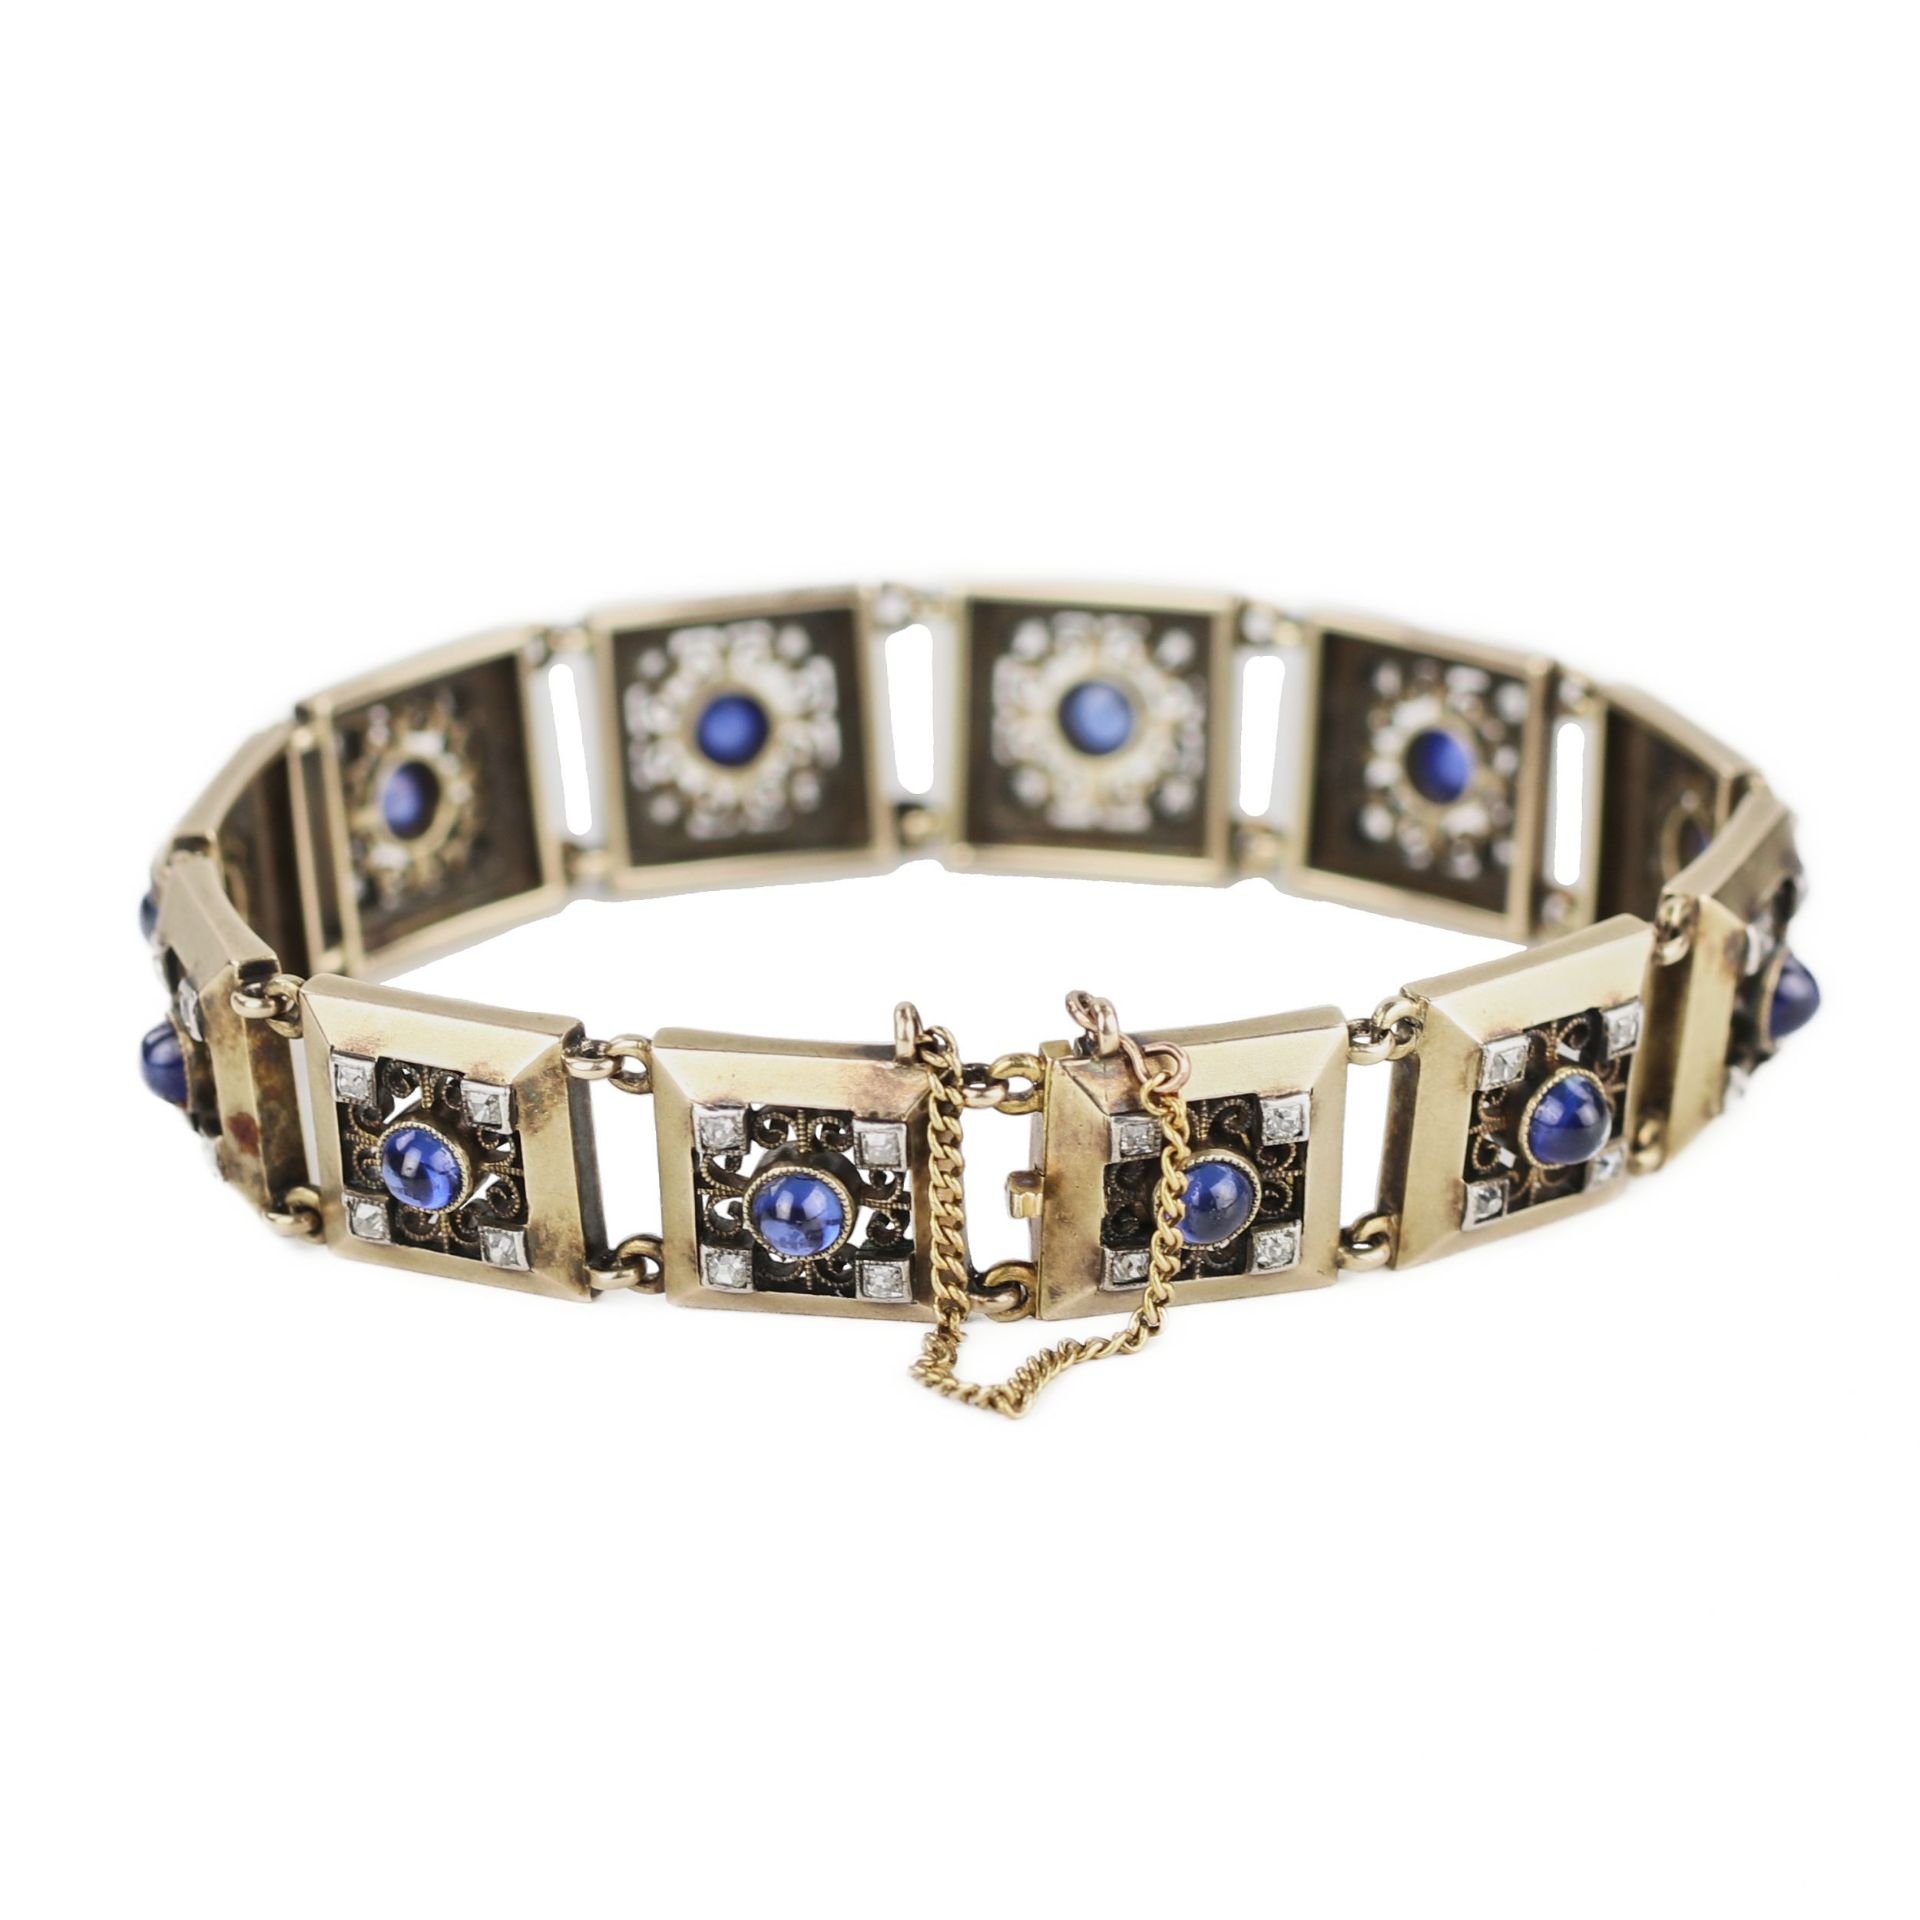 Elegant 56-carat Russian gold bracelet with sapphires and diamonds from Faberge firm. Moscow, Russia - Image 2 of 8